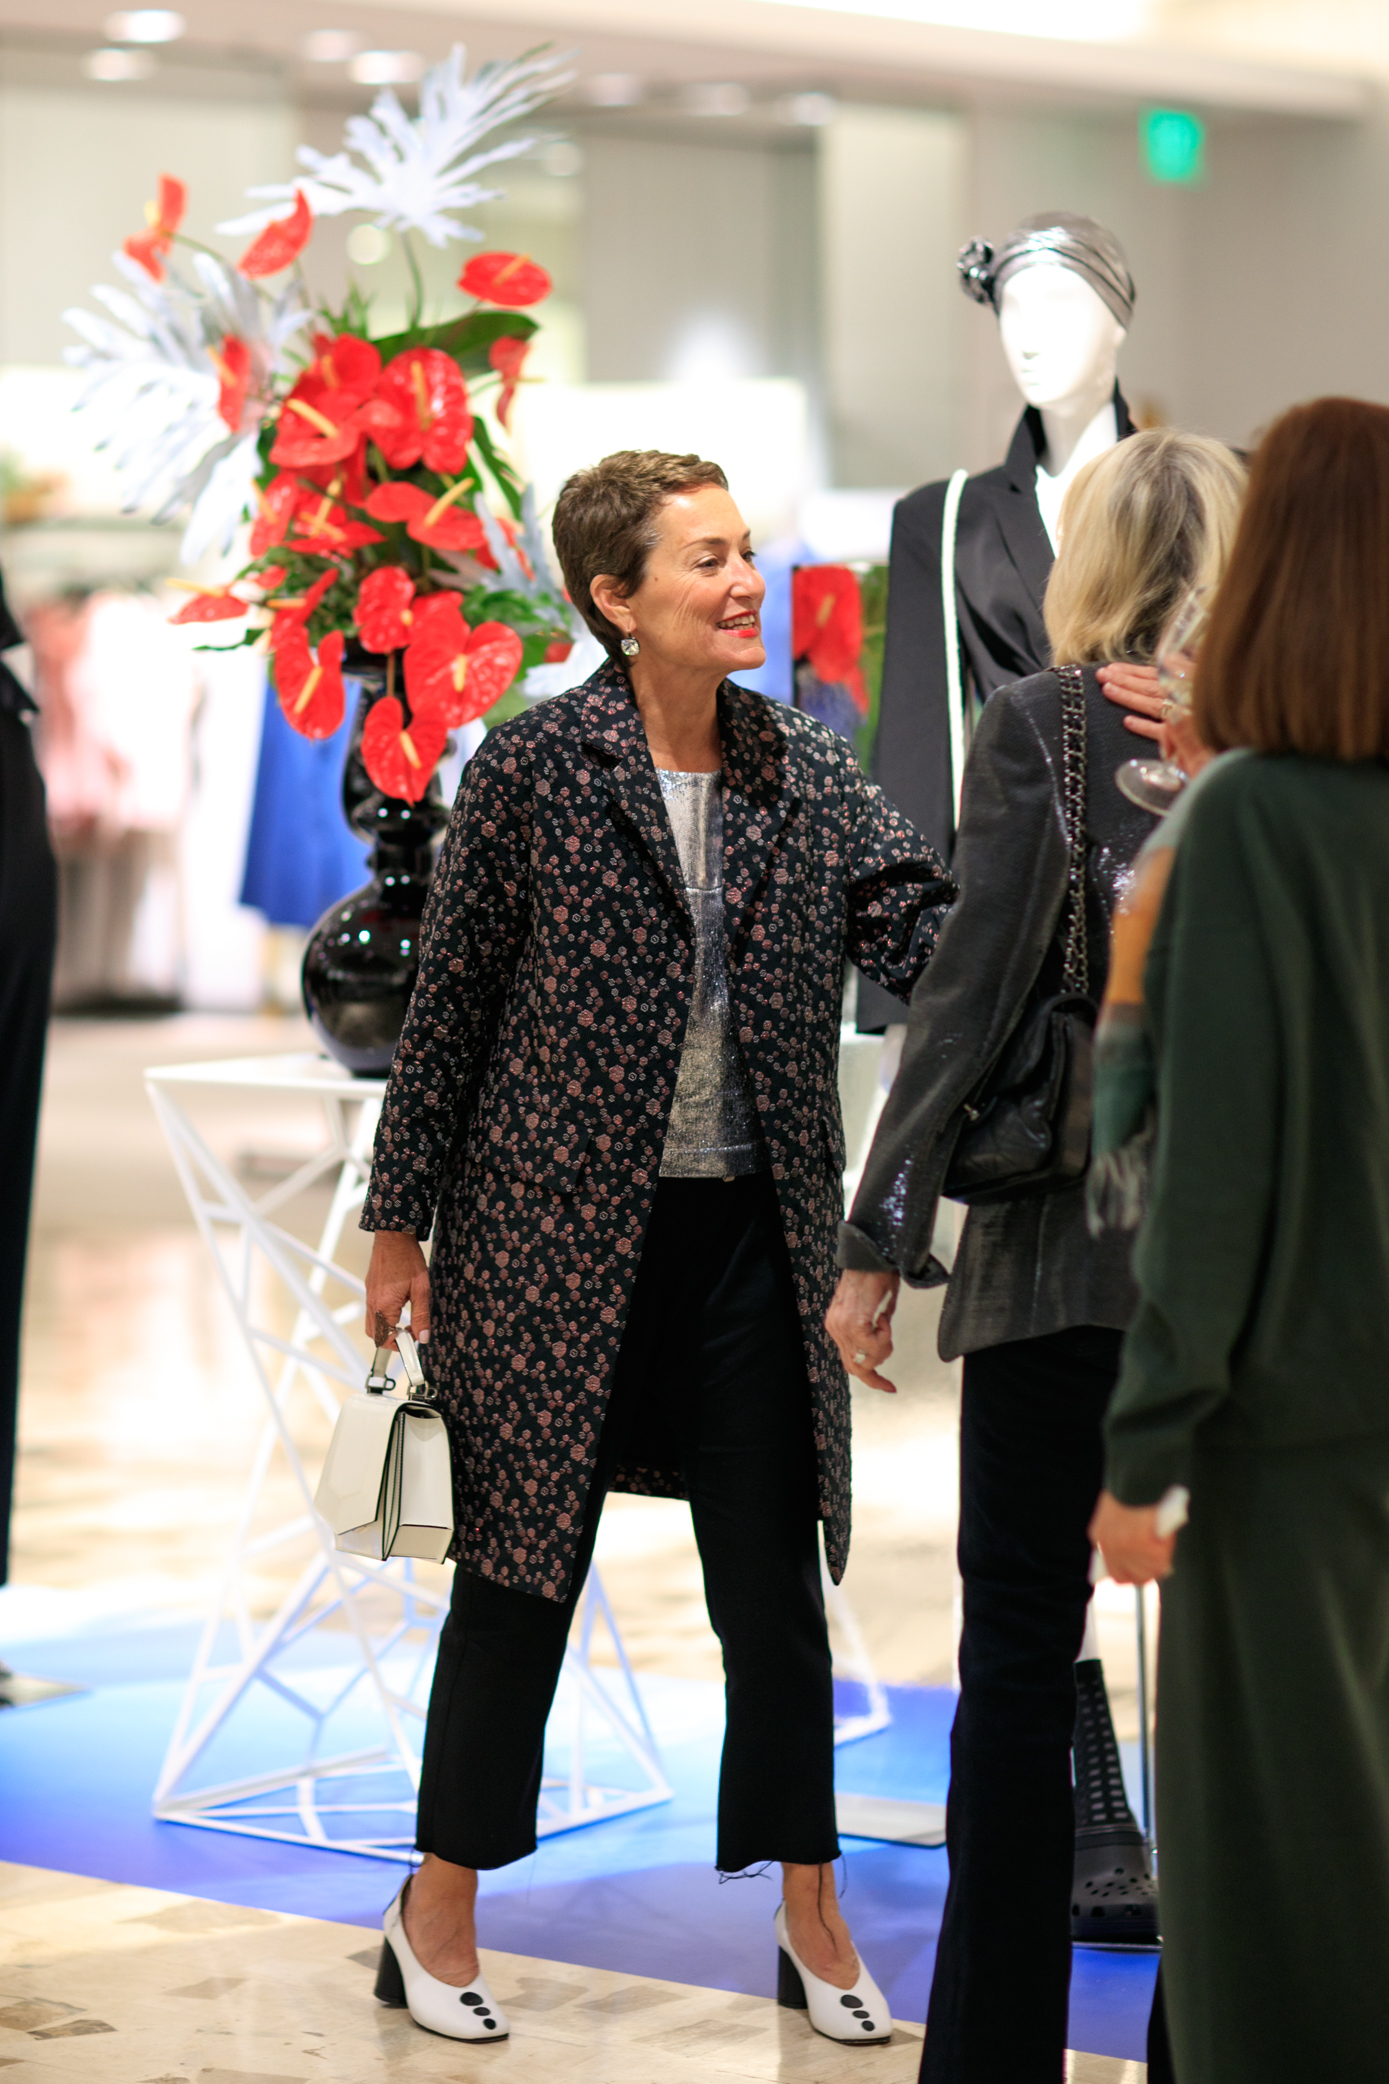 Neiman Marcus Celebrated Women's History Month with Exclusive Customer  Experiences in All 36 Stores